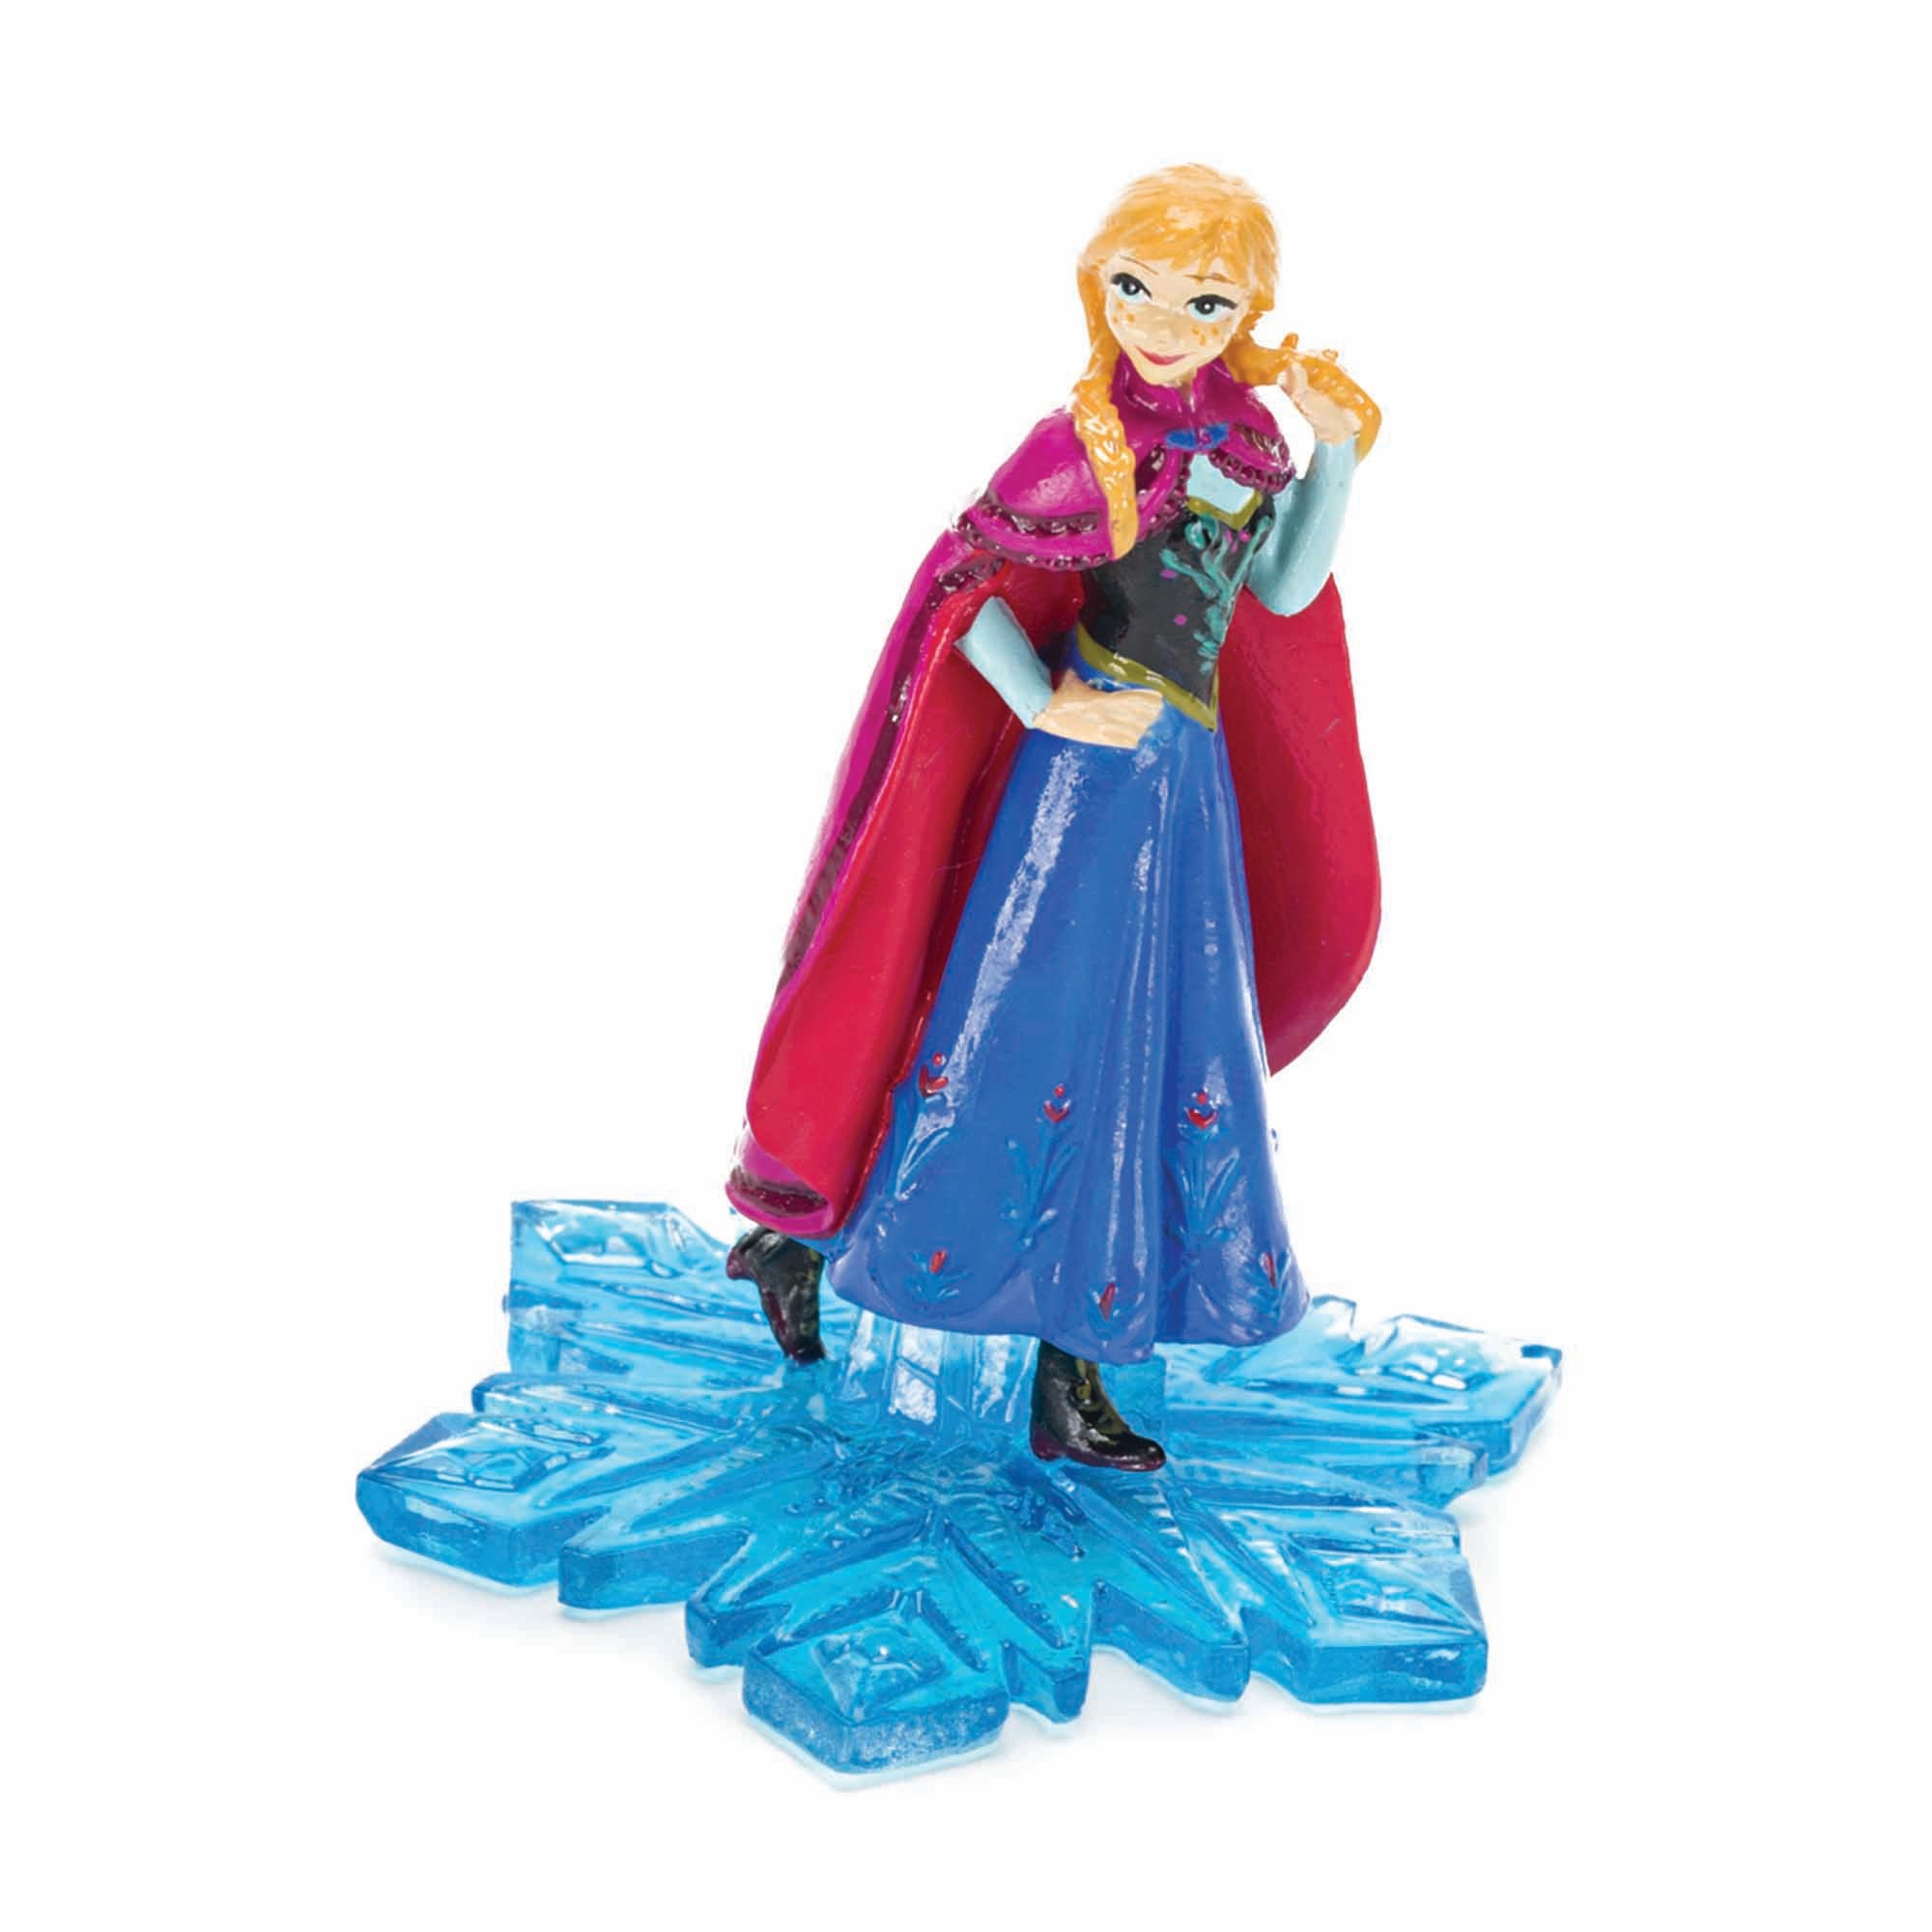 Penn-Plax Officially Licensed Disney's Frozen Fish Tank and